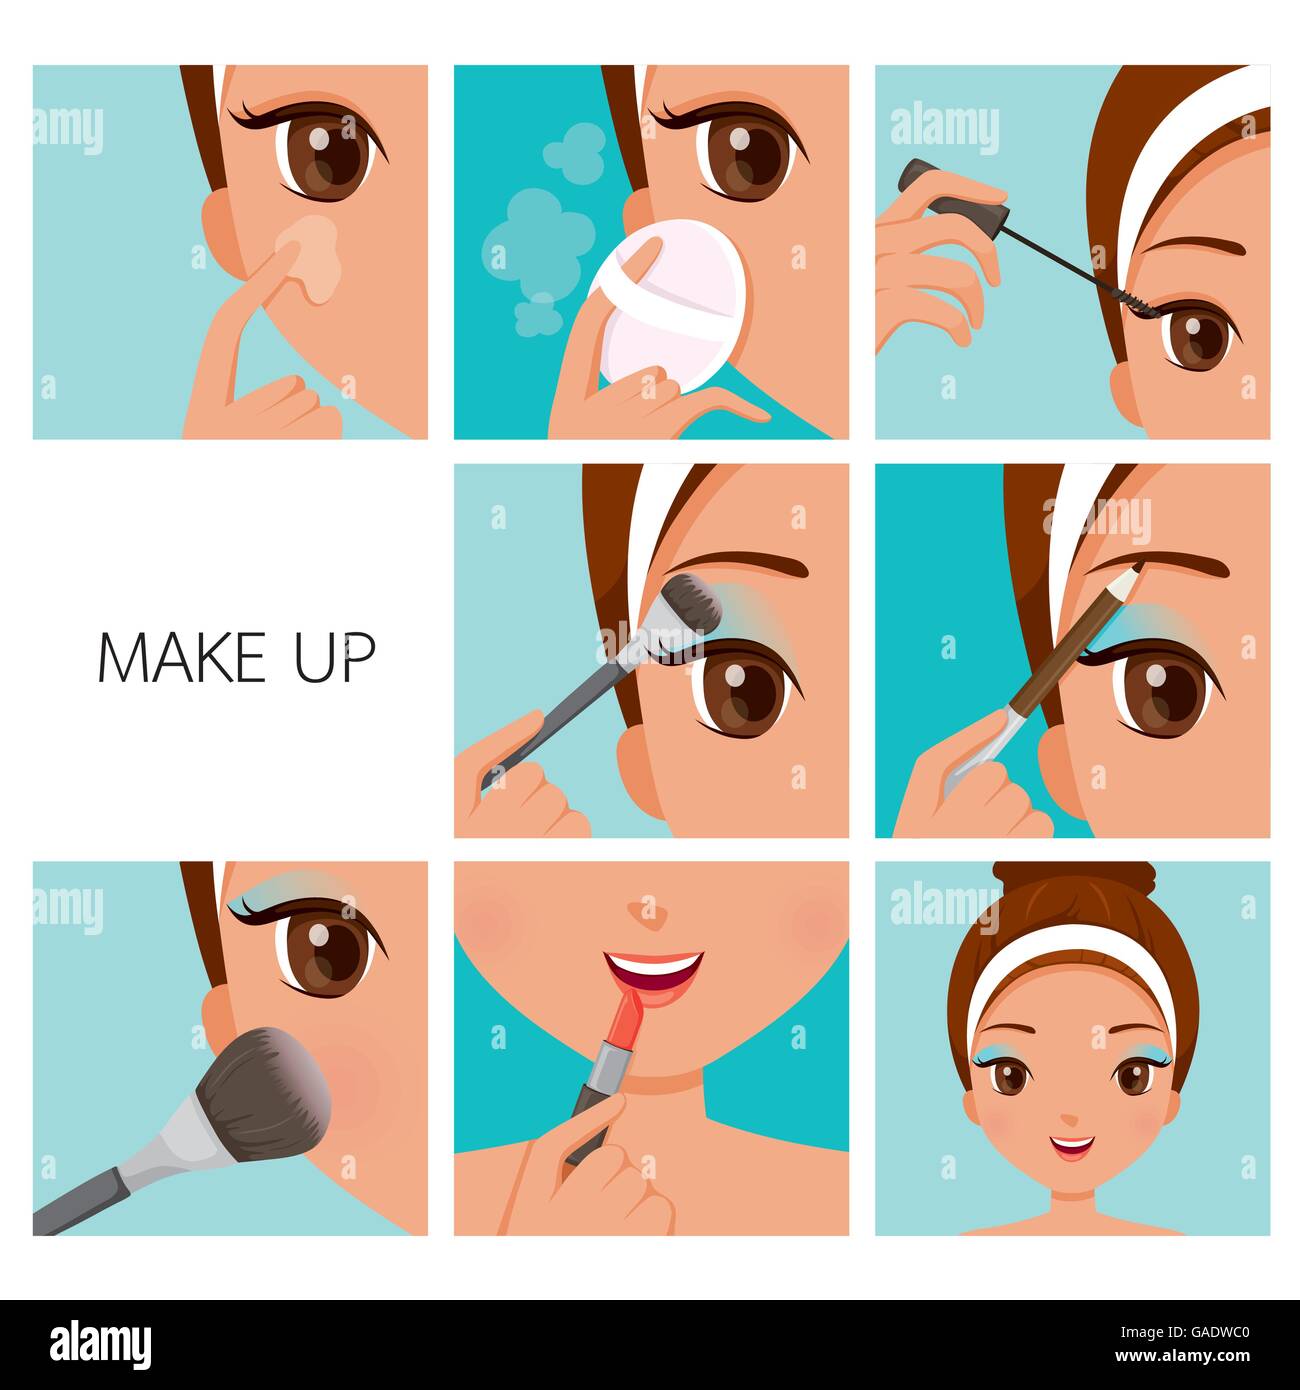 Step To Make Up For Woman With Tanned Skin, Facial, Beauty, Cosmetic, Makeup, Health, Lifestyle, Fashion Stock Vector